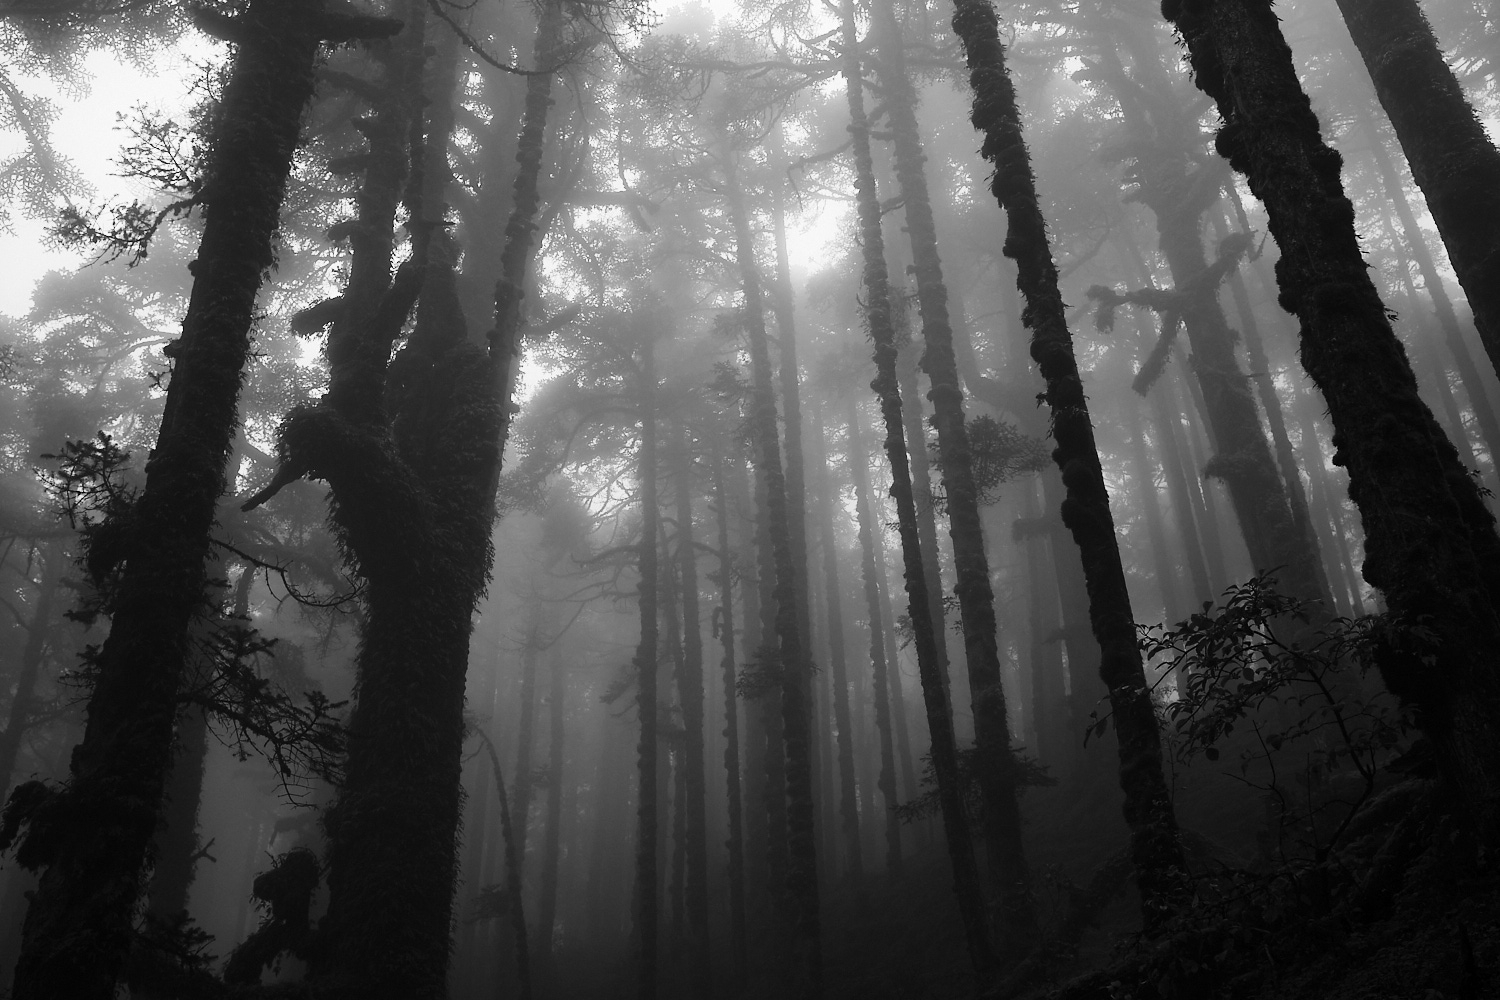 Walking though the foggy forest